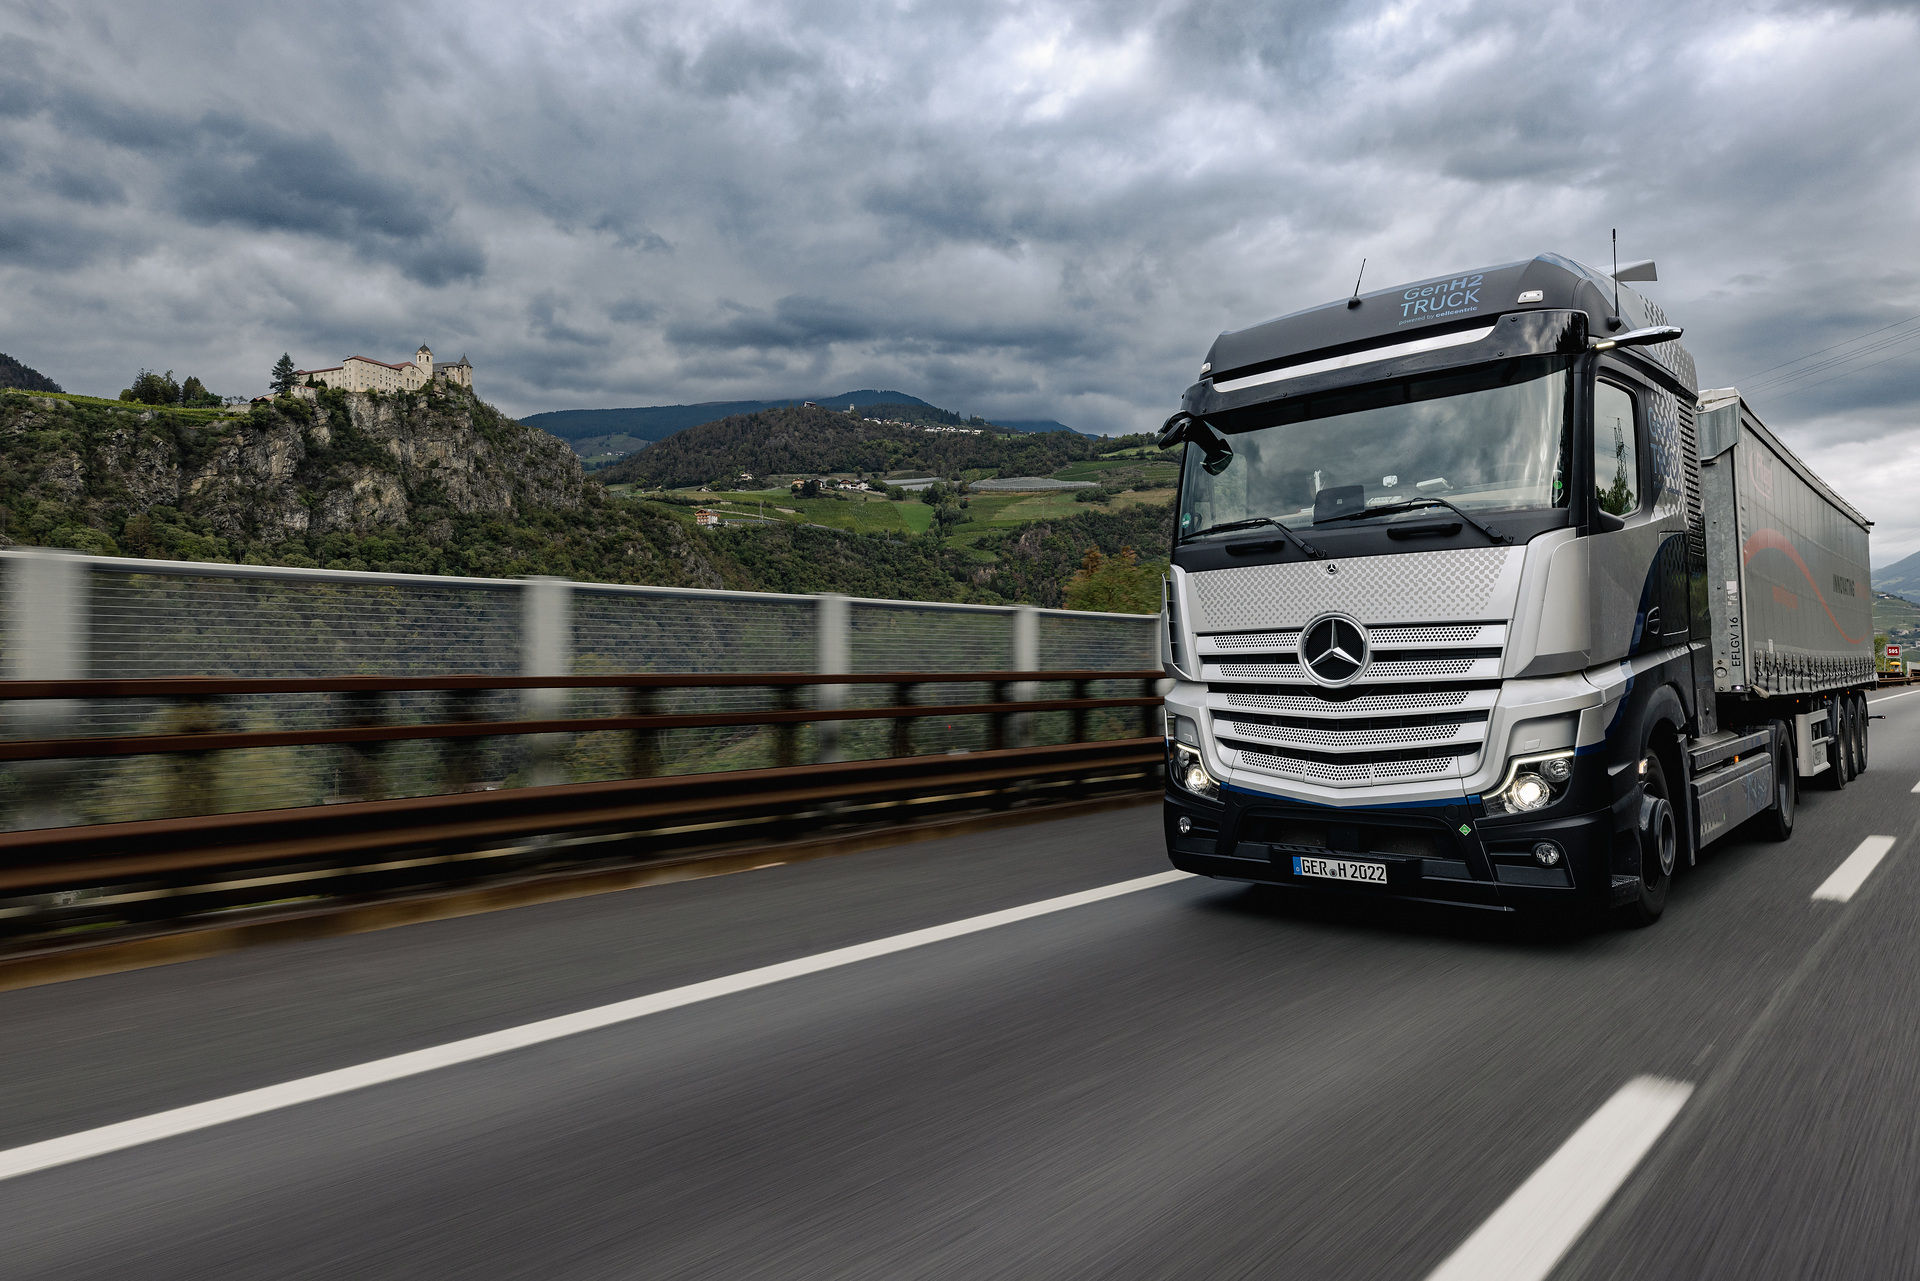 With hydrogen power across the Brenner Pass: Daimler Truck carries out first altitude tests with fuel-cell truck